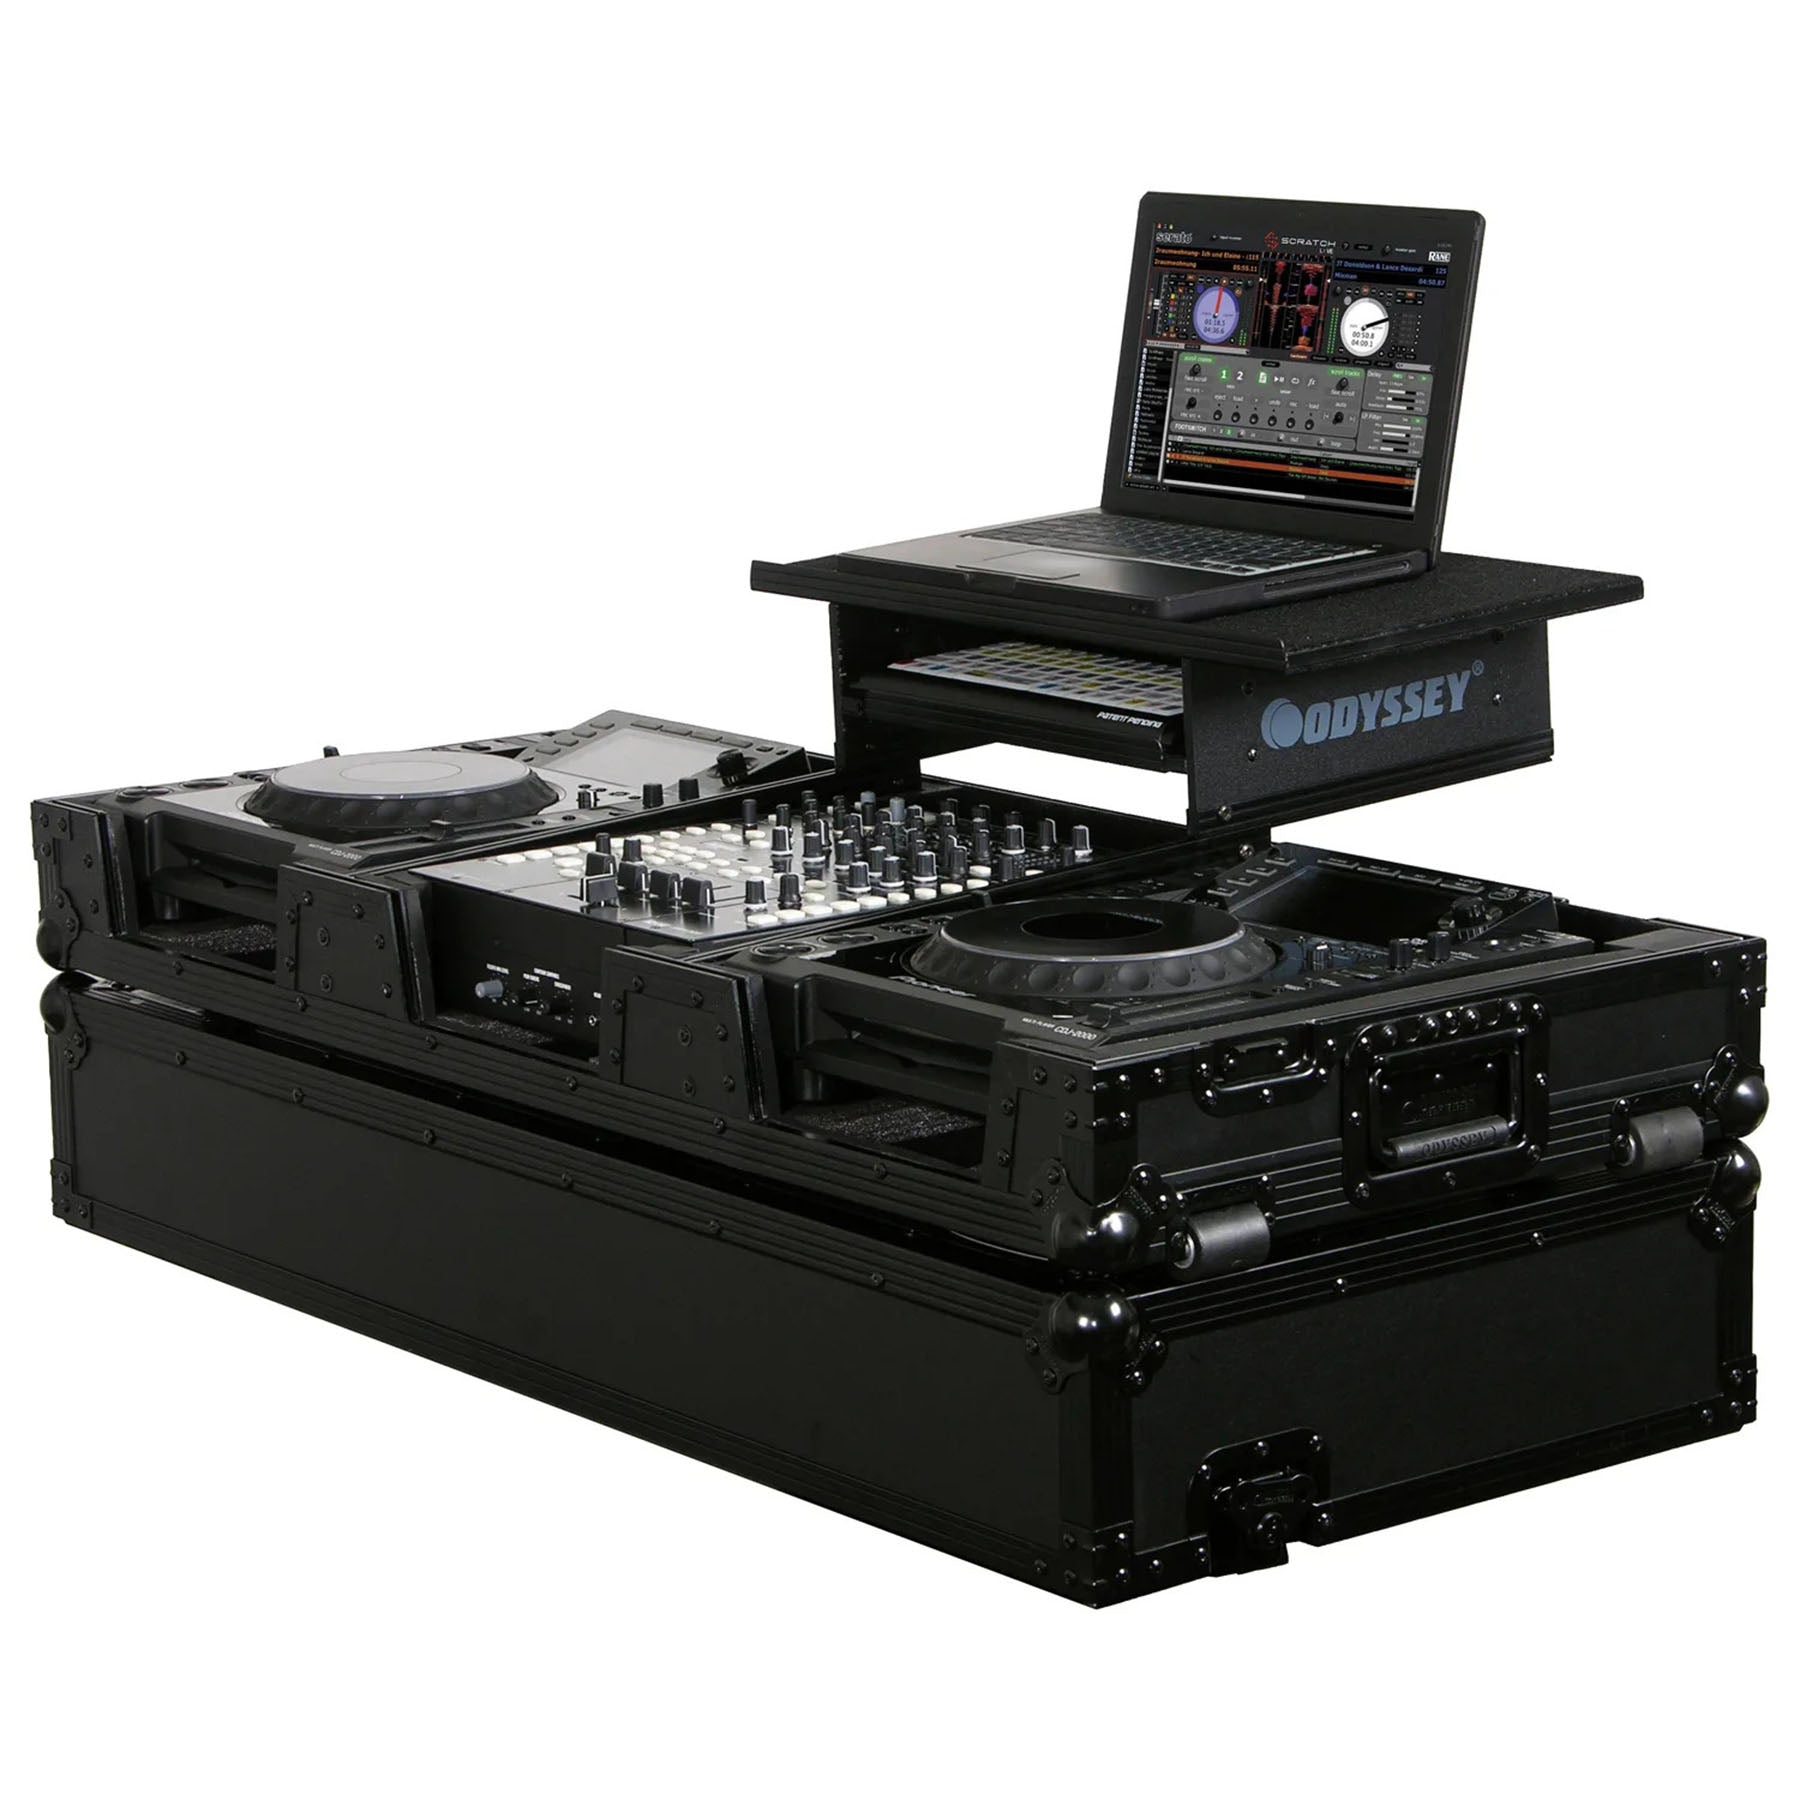 Open Box: Odyssey FZGS12CDJWBL 12" Format DJ Mixer and Two Large Format Media Players Coffin Flight Case with Glide Platform - Black - Hollywood DJ